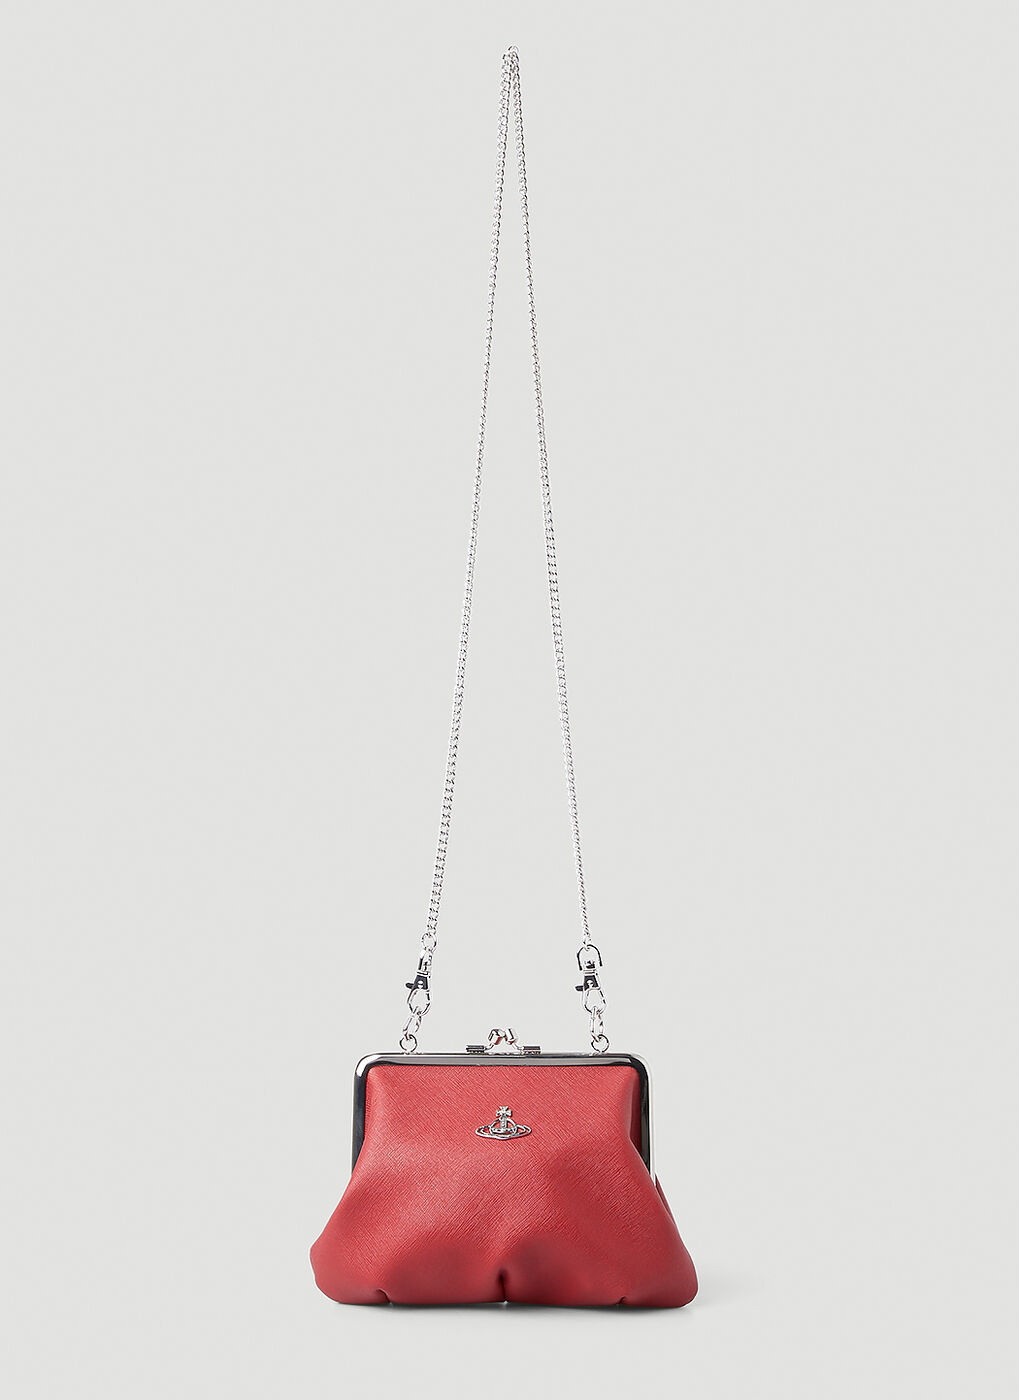 Granny Frame Purse in red | Vivienne Westwood®